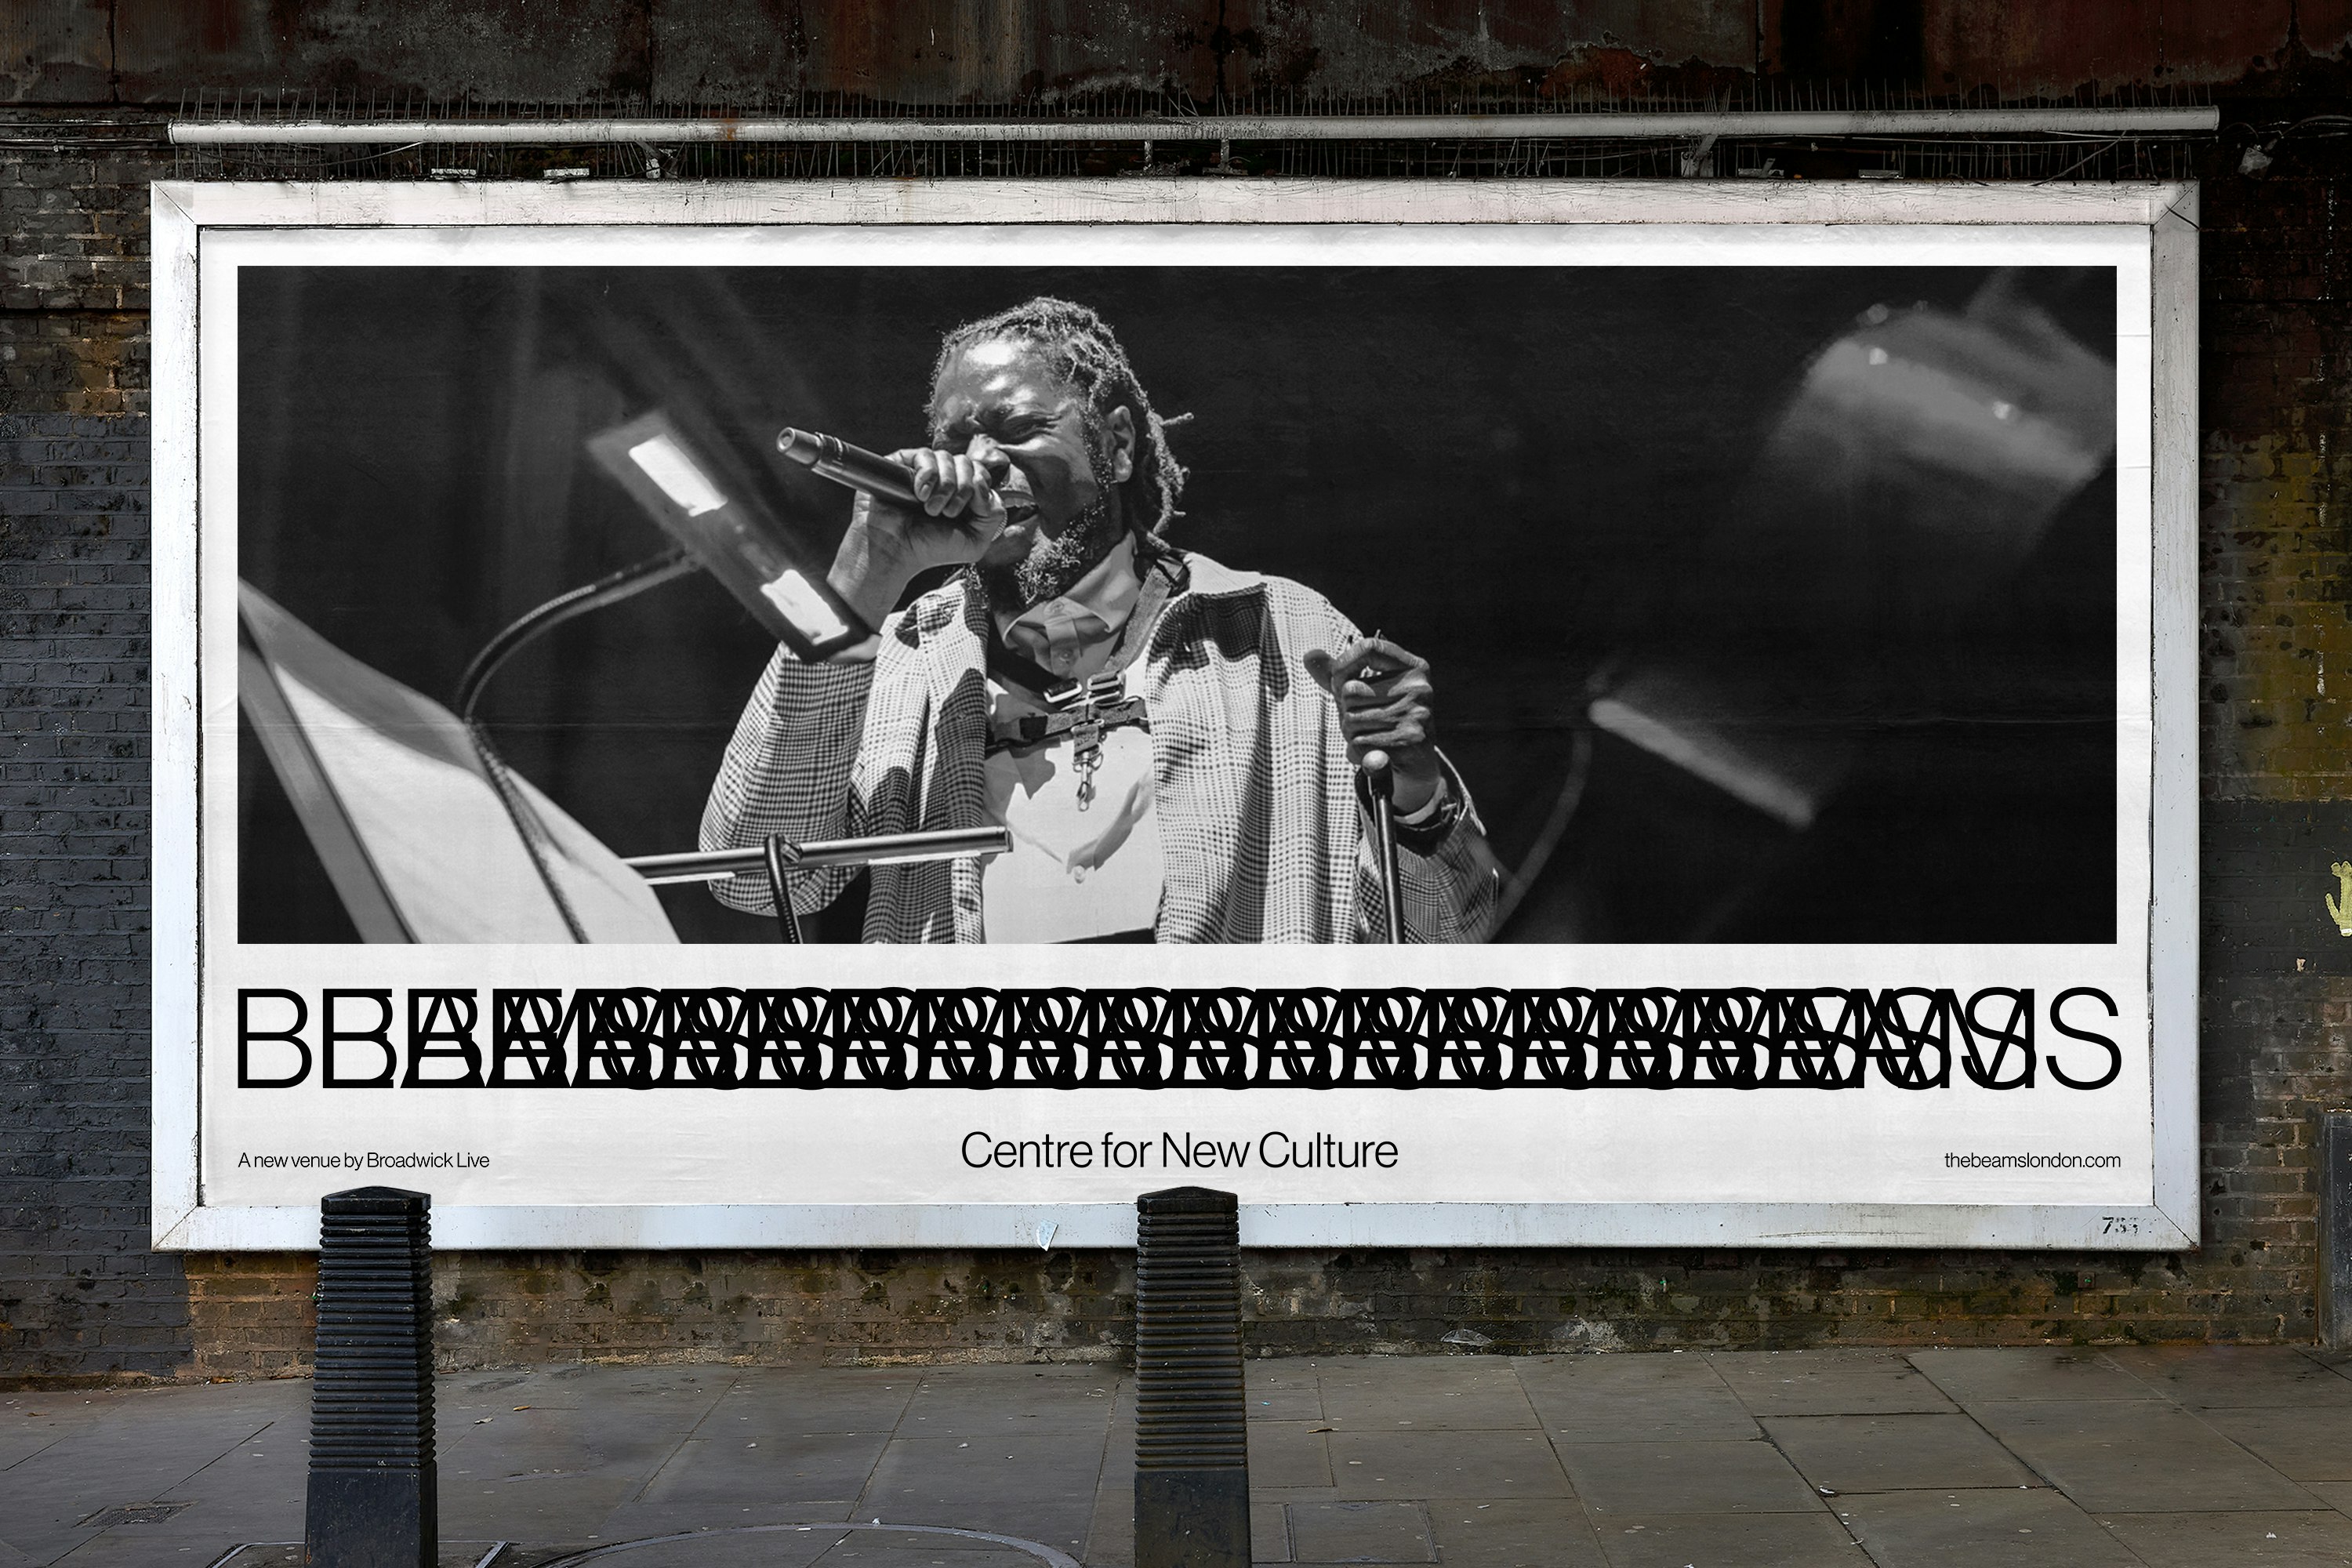 An out-of-home billboard advertisement for The Beams, an event venue in London.